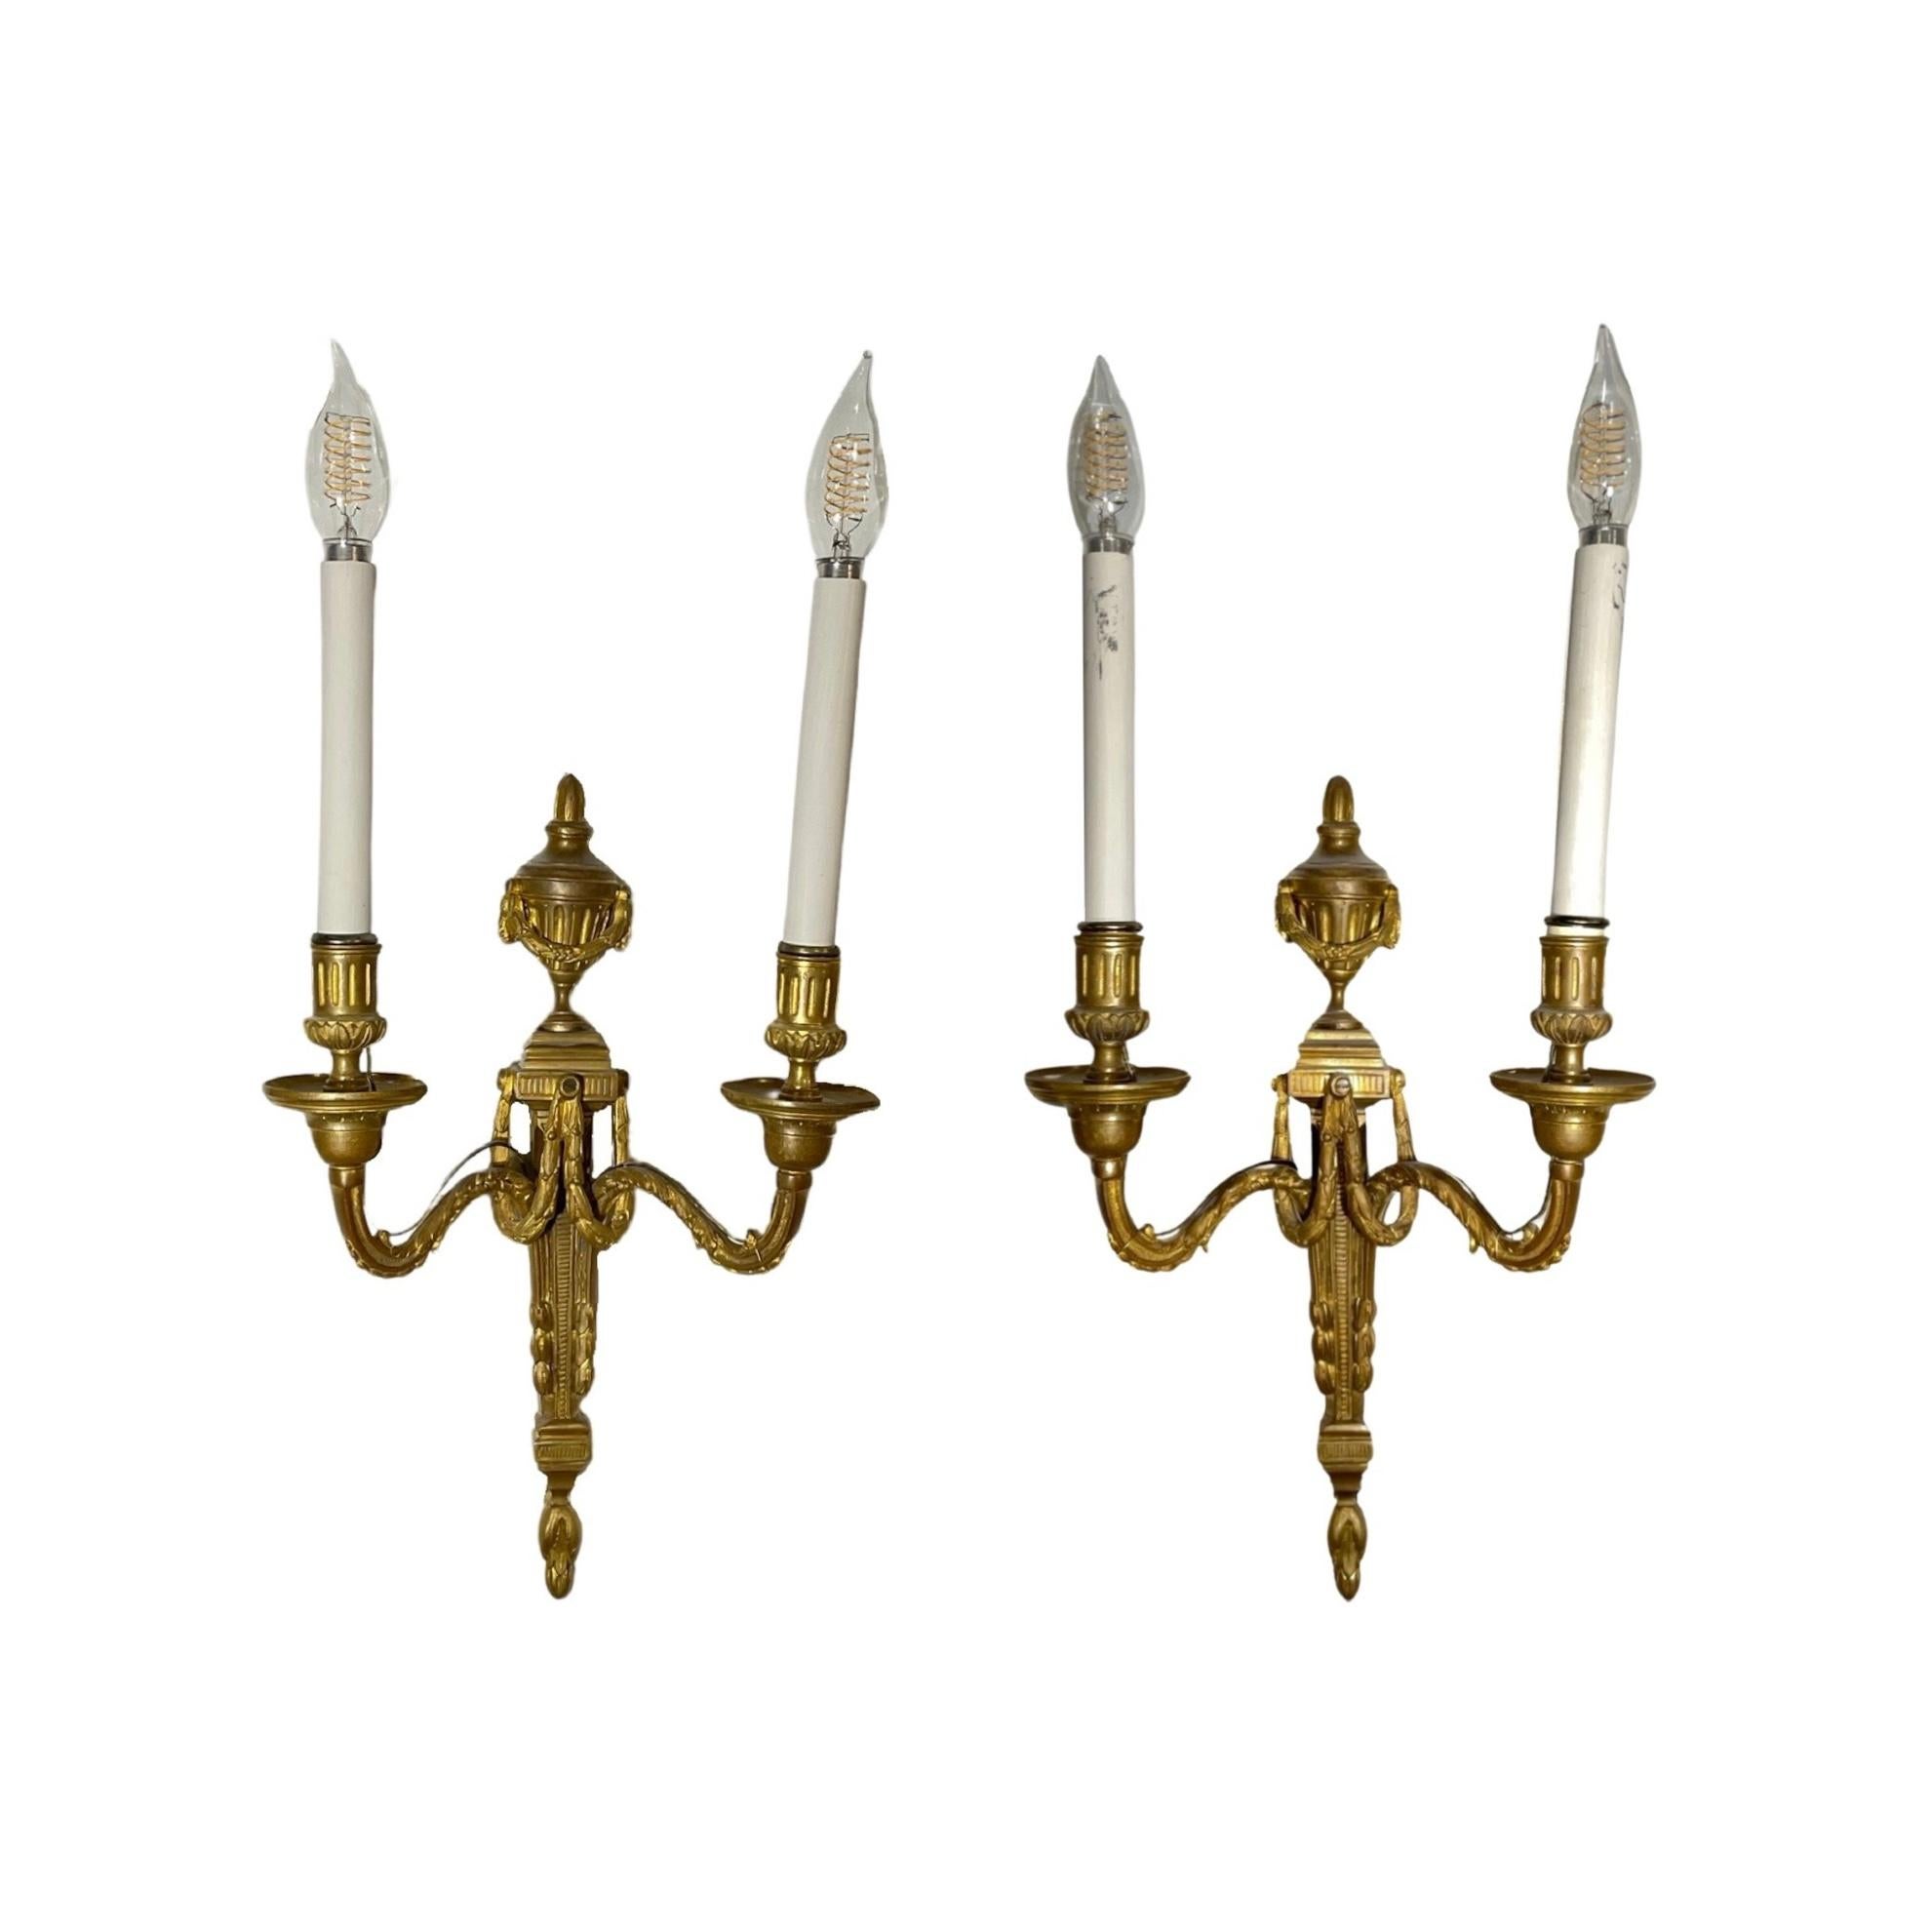 This is a pair of French wall sconces from the mid-18th century made from bronze. They feature intricate design details and are suitable for illuminating a range of settings in your home or office. Add a timeless, classic touch to your room with